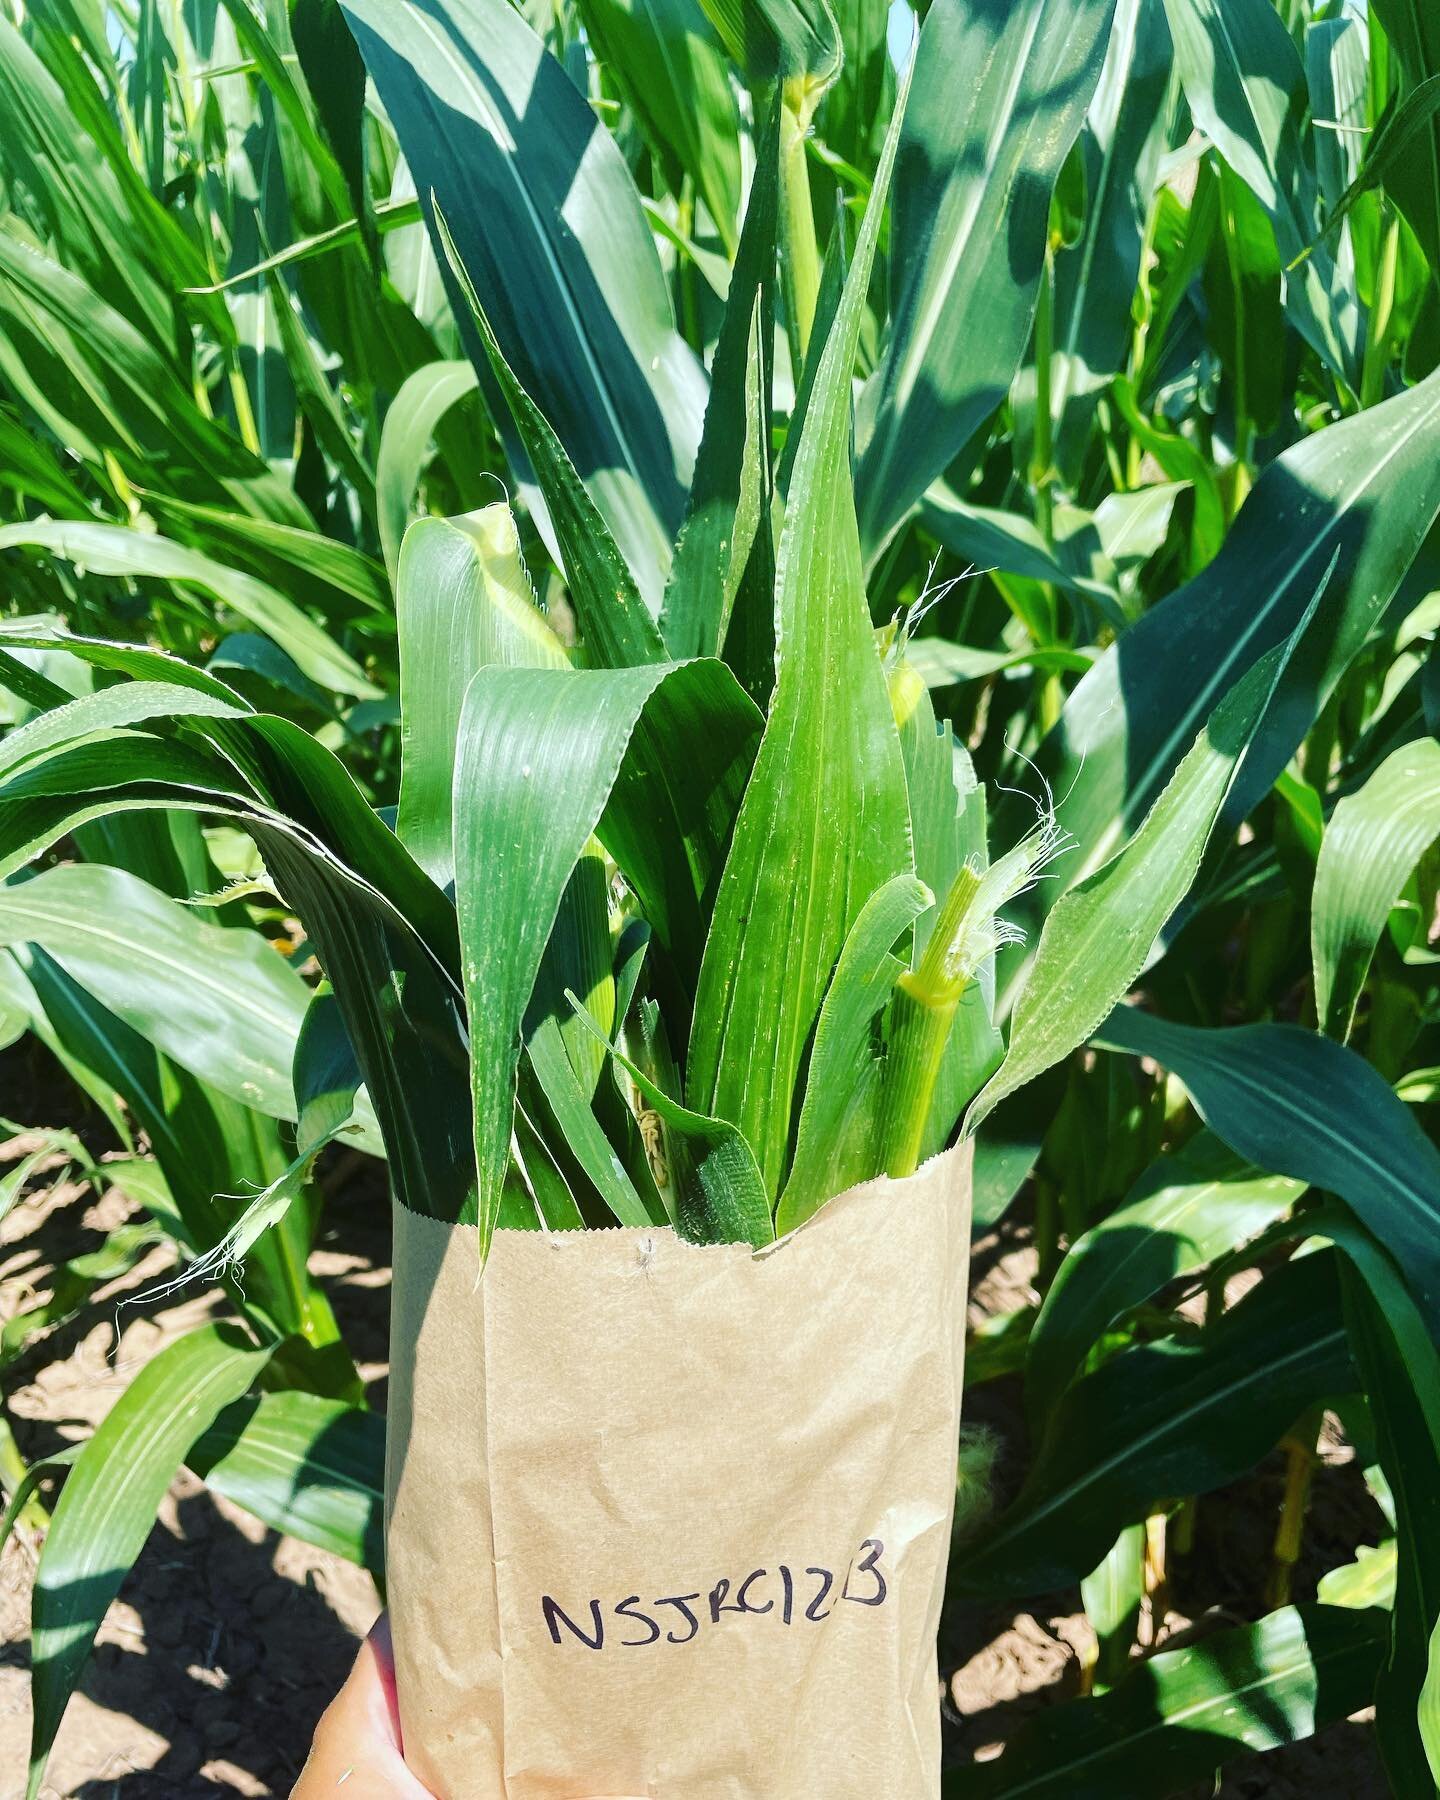 Corn is silking so we are tissue sampling! This is our first corn tissue sample of the year at an Atlantic Grains Council corn boron trial in Hants County, NS